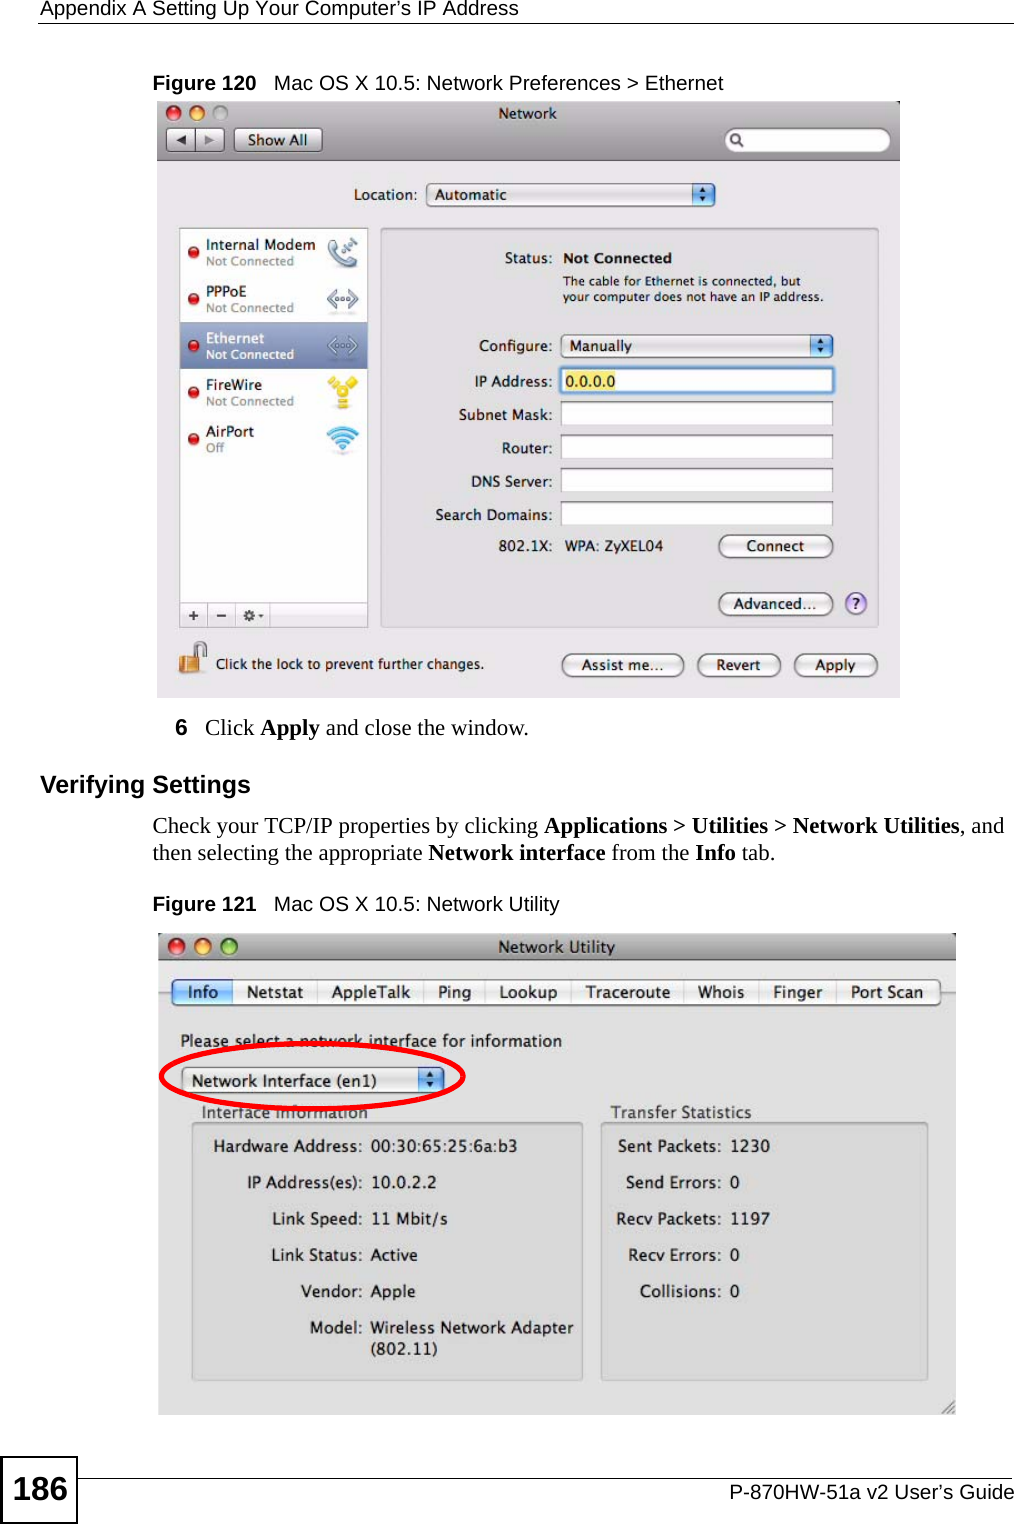 Appendix A Setting Up Your Computer’s IP AddressP-870HW-51a v2 User’s Guide186Figure 120   Mac OS X 10.5: Network Preferences &gt; Ethernet6Click Apply and close the window.Verifying SettingsCheck your TCP/IP properties by clicking Applications &gt; Utilities &gt; Network Utilities, and then selecting the appropriate Network interface from the Info tab.Figure 121   Mac OS X 10.5: Network Utility